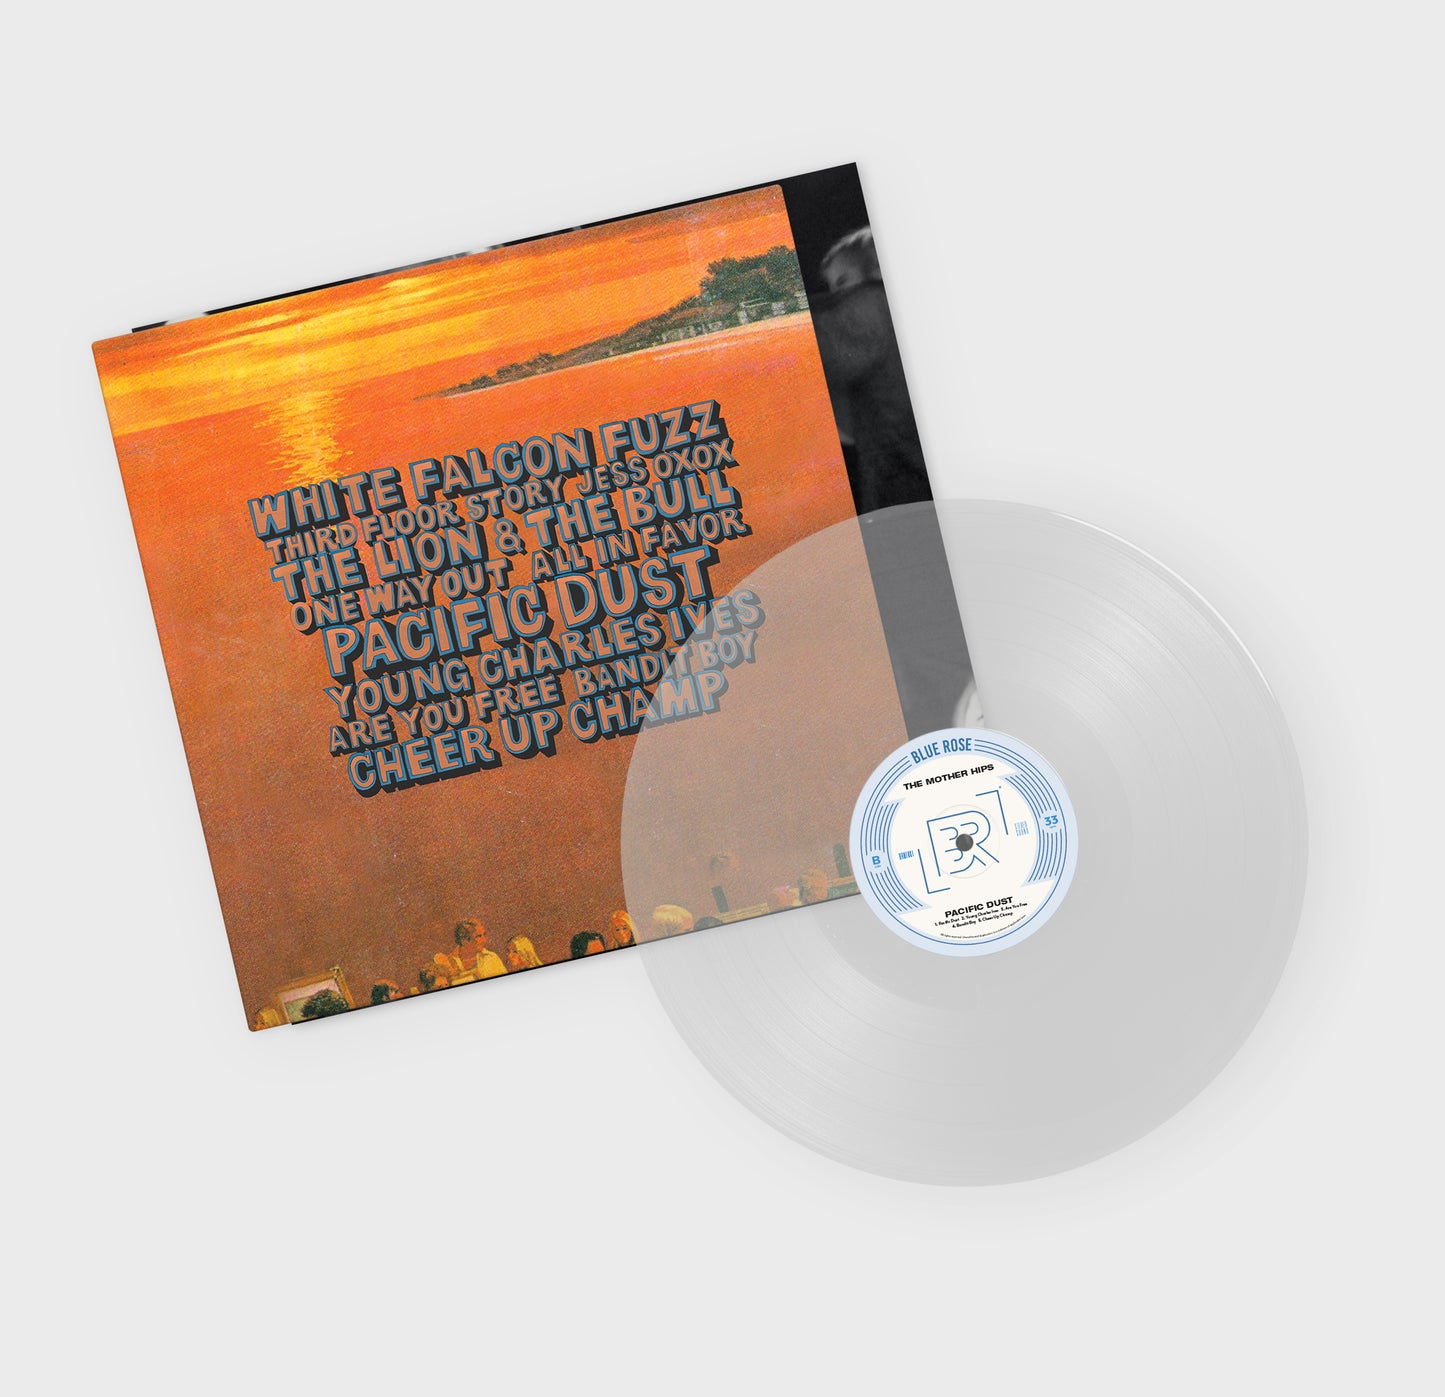 The Mother Hips - "Pacific Dust" Vinyl Reissue (Clear)